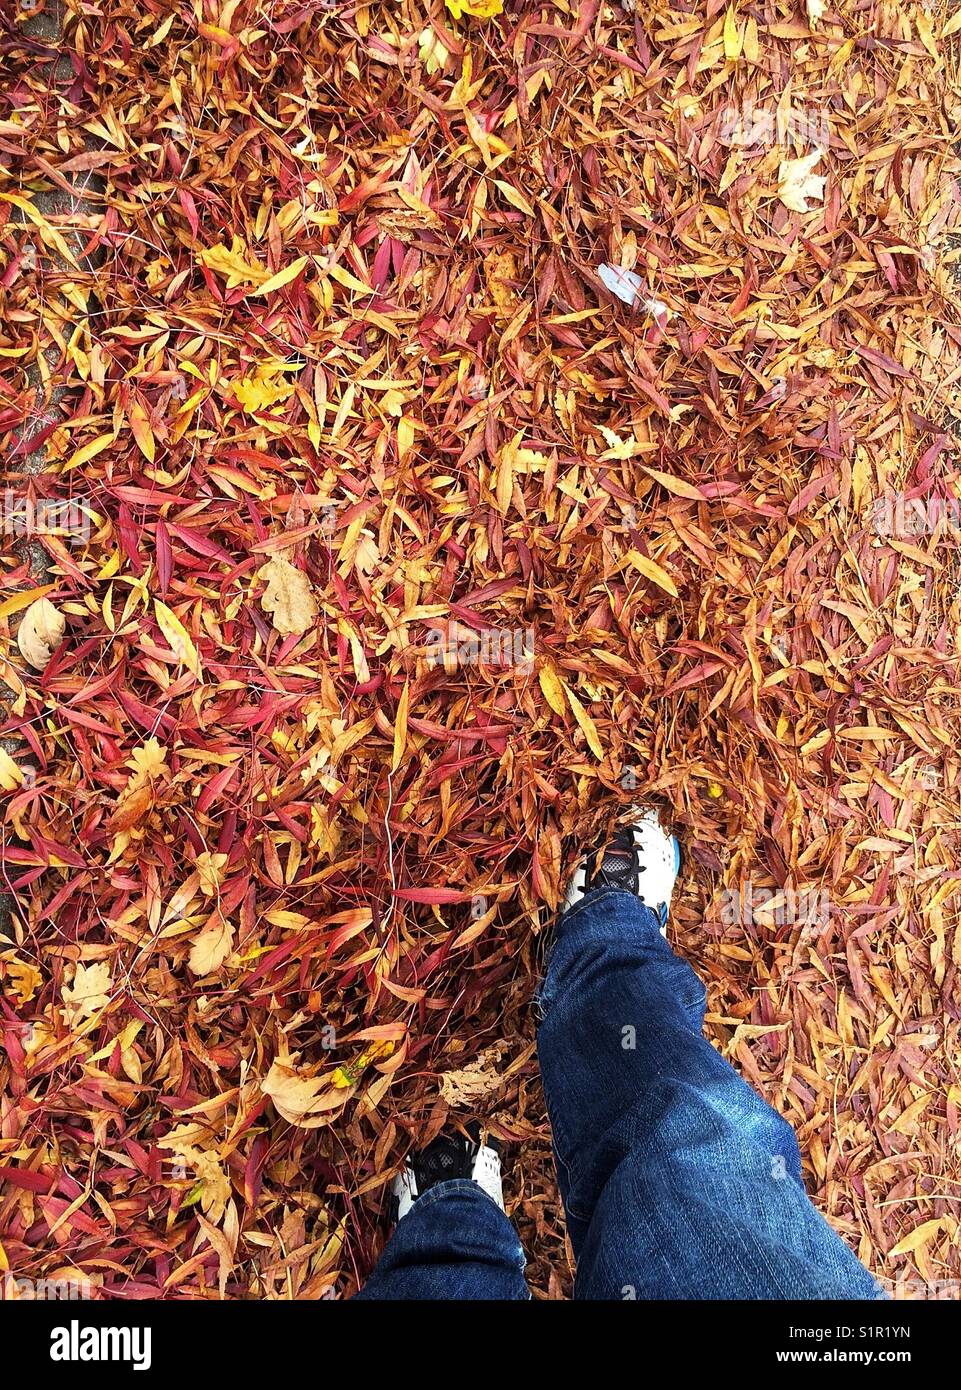 Person walking through a pile of autumn leaves. Stock Photo